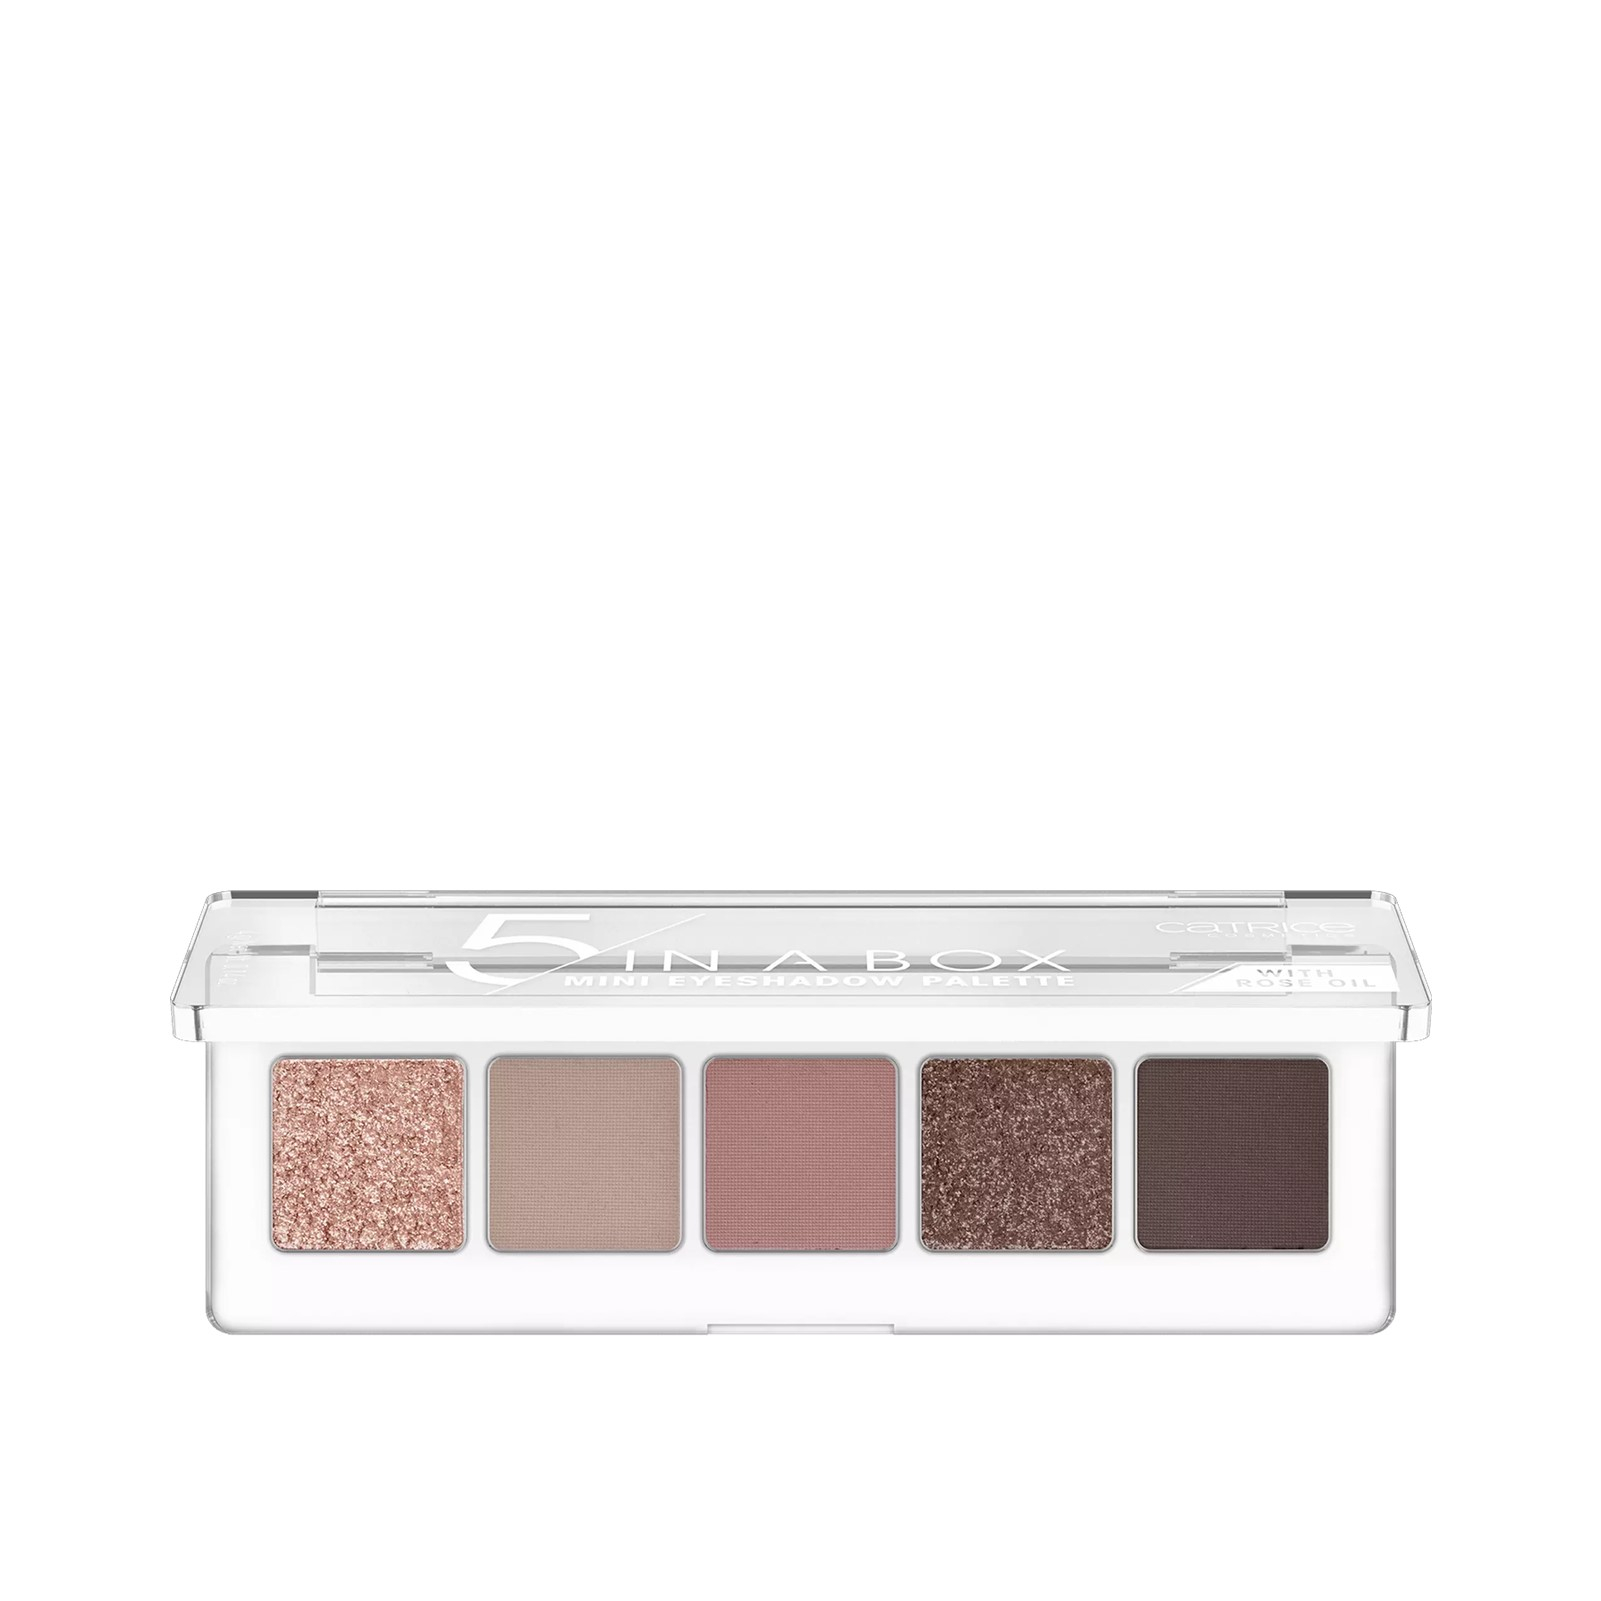 USA In Palette Buy Soft Box Catrice A Rose Look Eyeshadow 5 020 · Mini